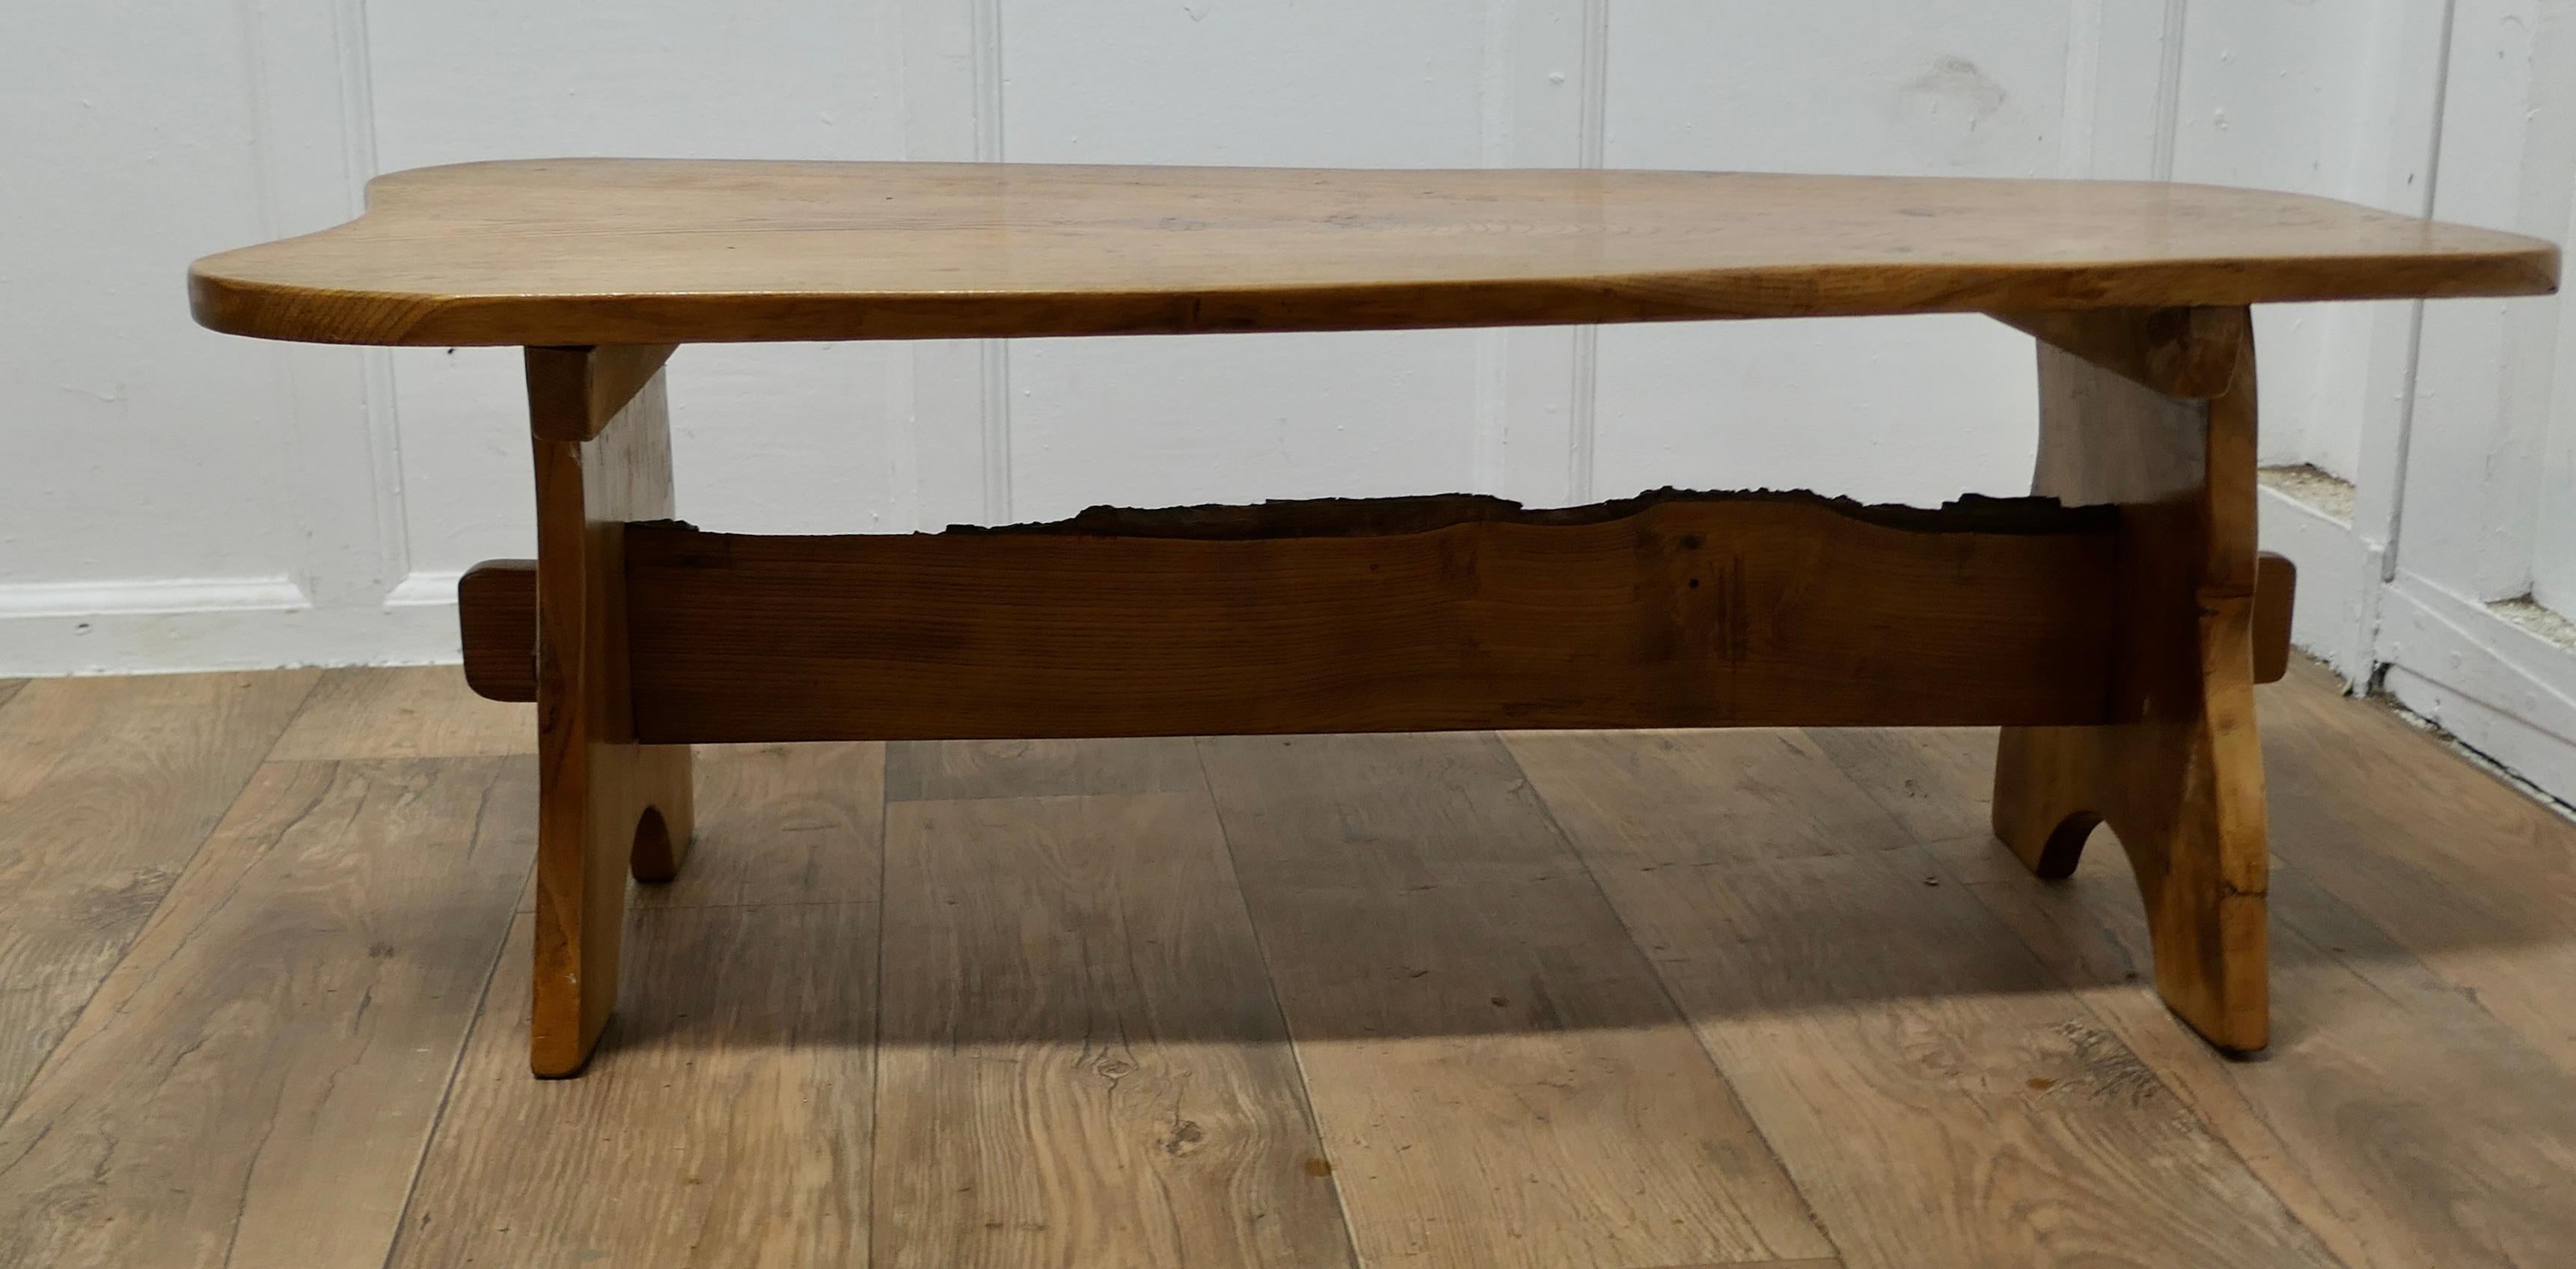 Country Elm Refectory Coffee Table

This is a good sturdy country made table, it has an 1” thick solid elm top which has very attractive figuring, a large slice of elm in the shape it was cut from the tree. The sturdy refectory style legs have a